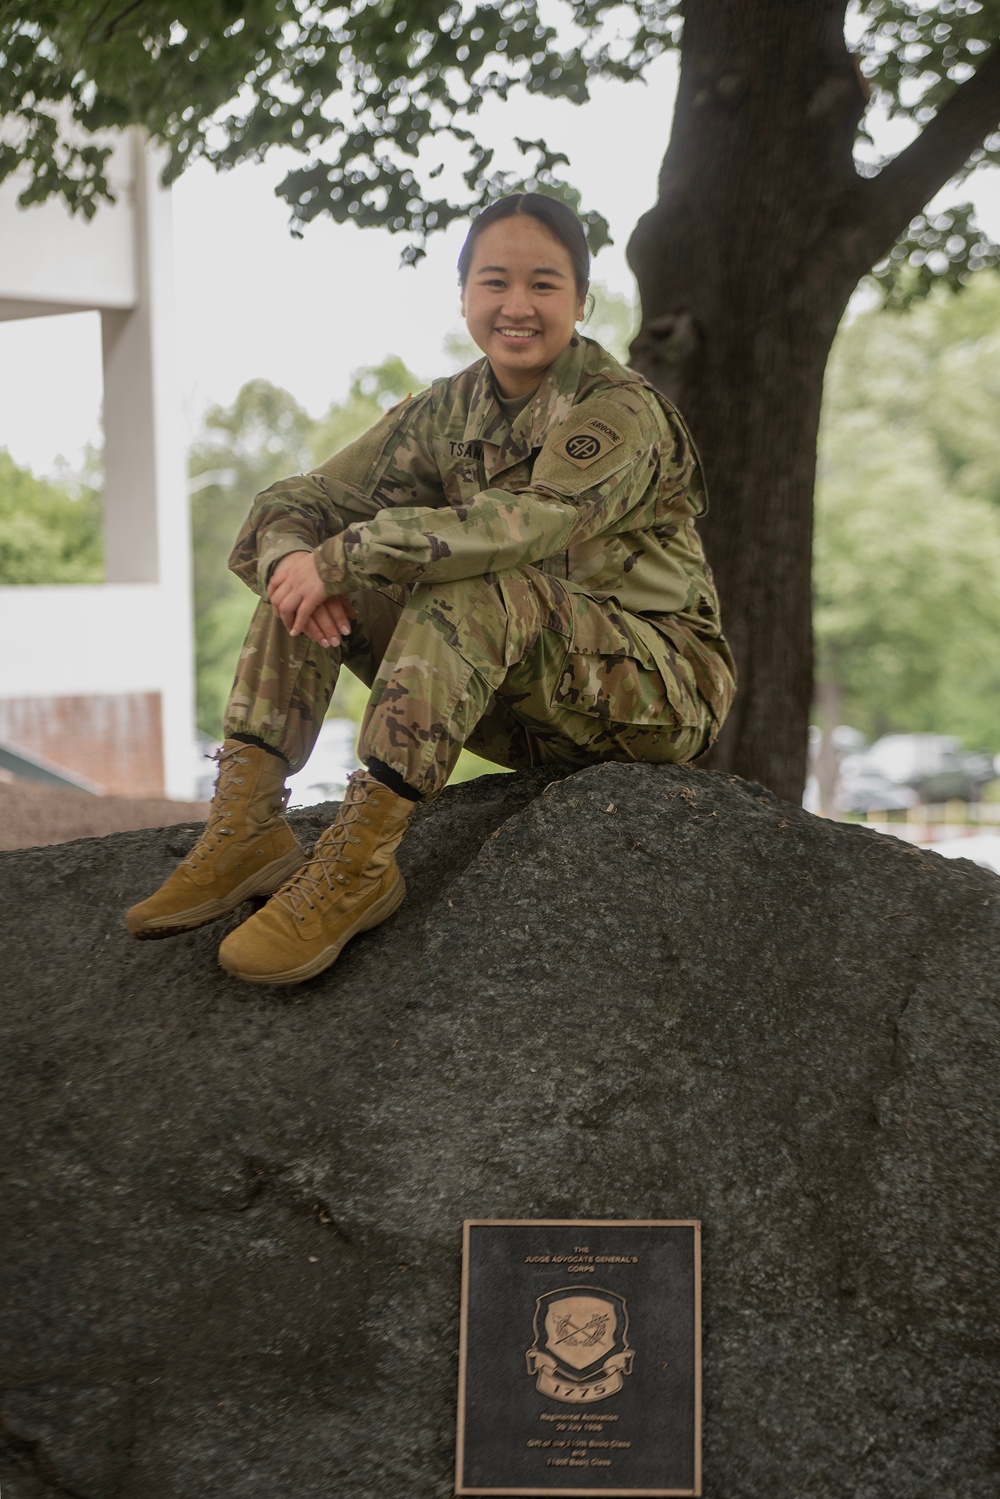 Photo By Billie Suttles | 223rd Officer Basic Course student 1st Lt. Seneca Tsang pictured on the regimental rock in front of The Judge Advocate General's Legal Center and School.